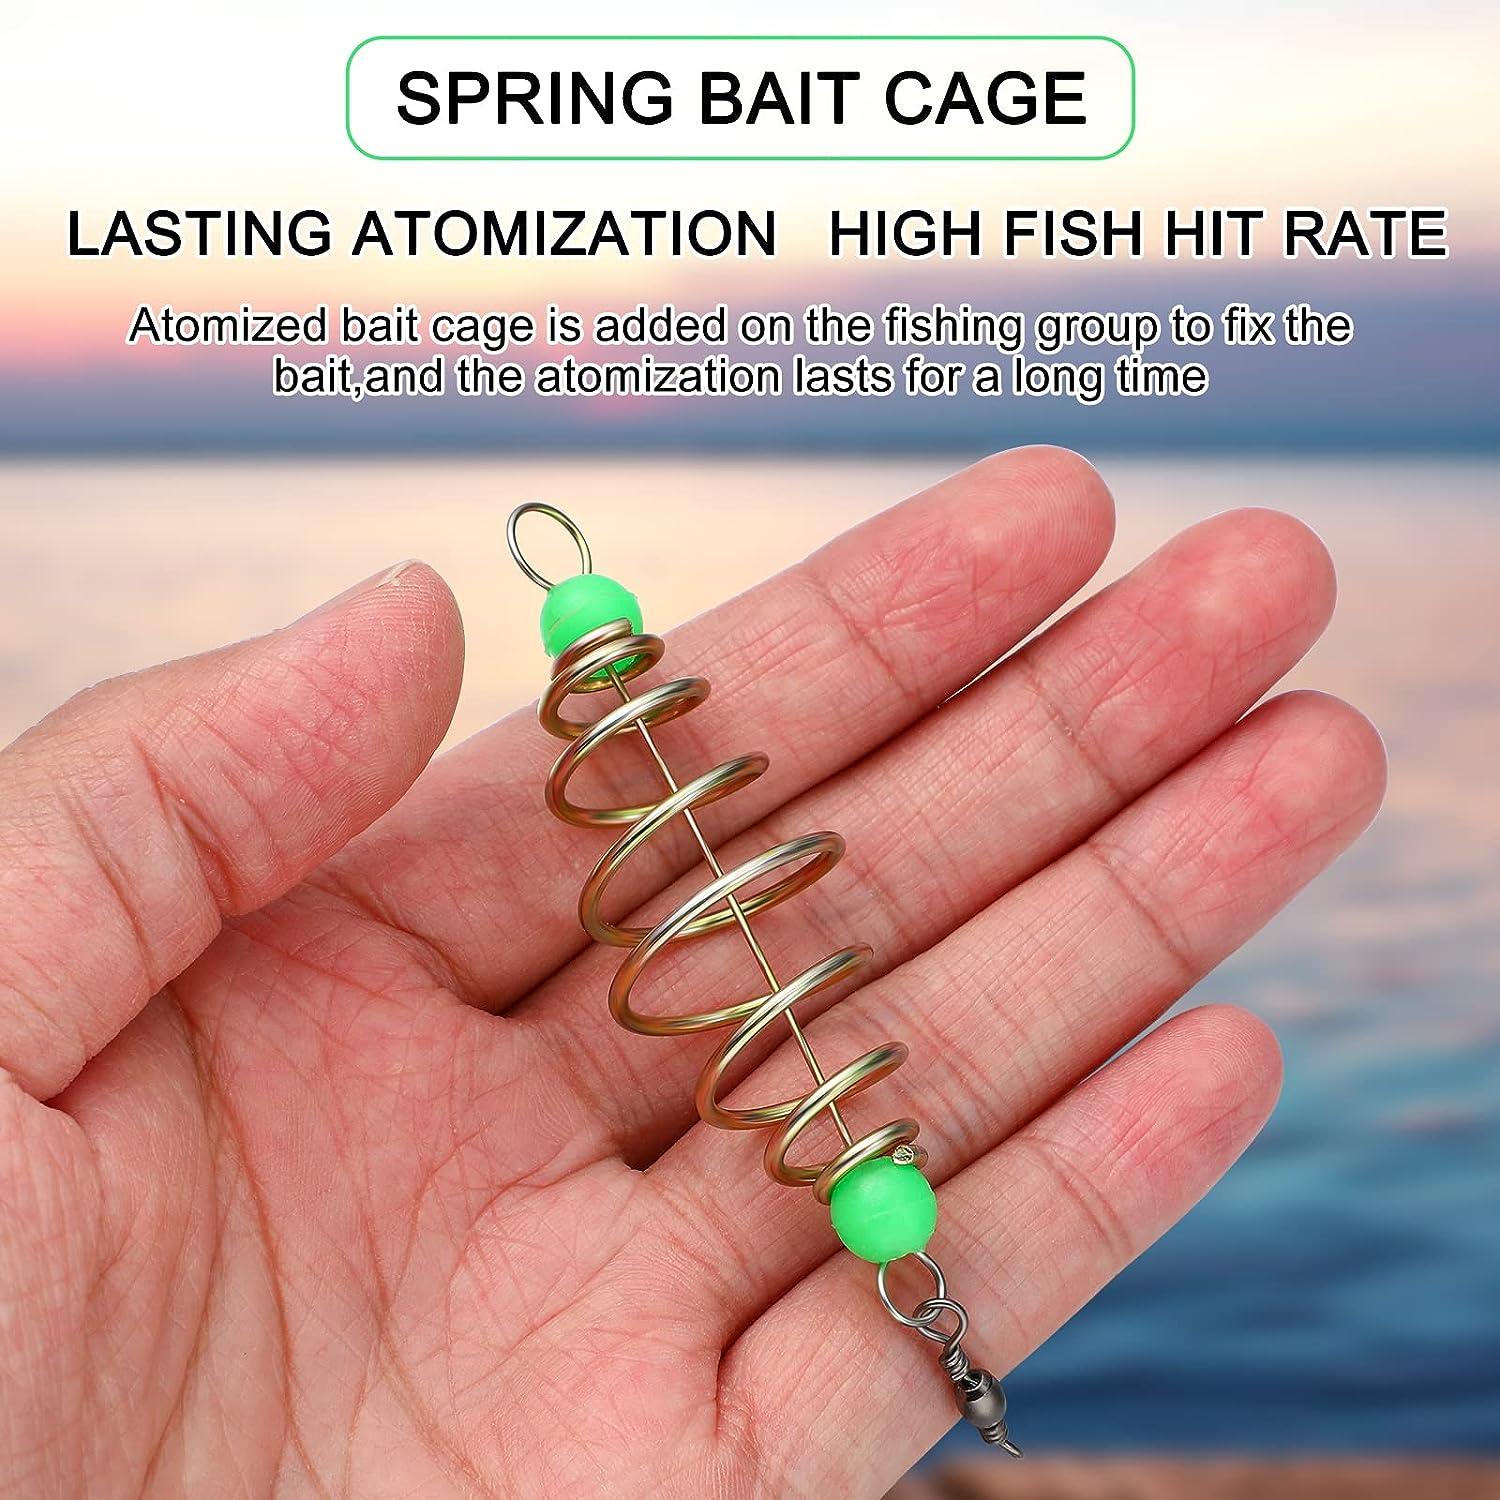 Buy Alomejor 4Pcs Fishing Bait Cage Set, Copper Spring Fishing Bait Trap Cage  Feeder Basket Holder with Hooks Fishing Tackle Kit Online at Low Prices in  India 